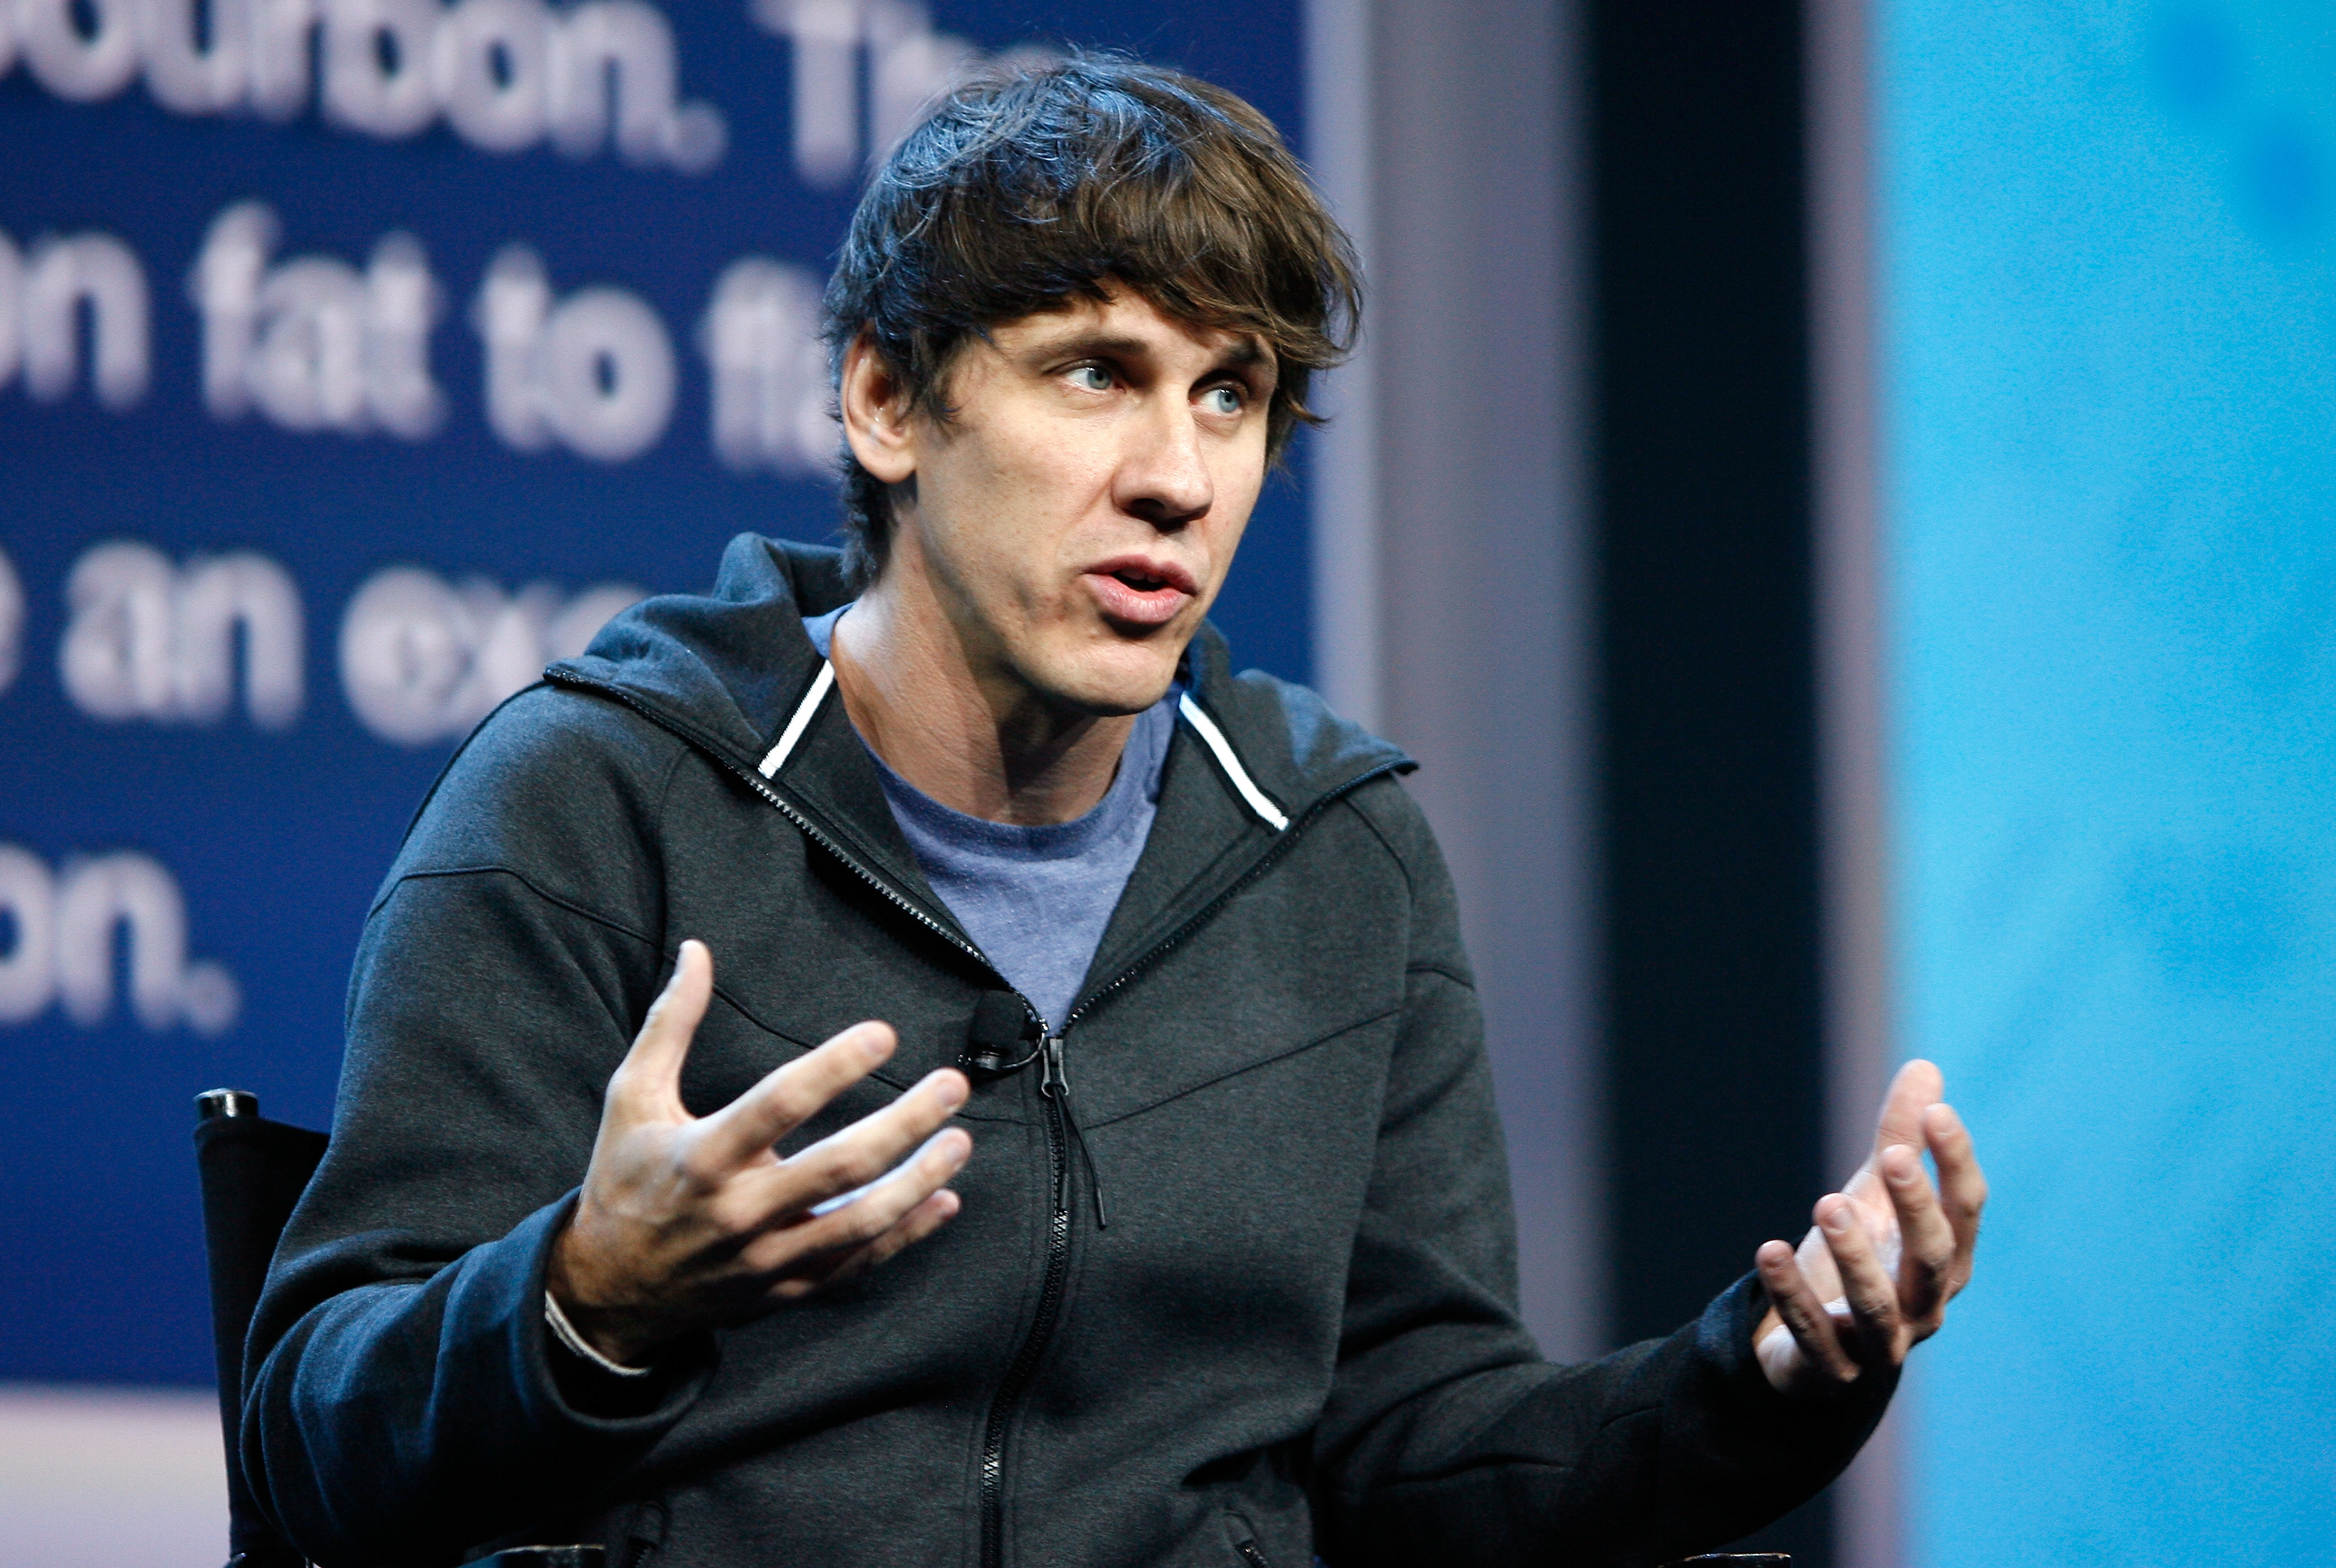 Foursquare Squares Off with Yelp After Major Overhaul